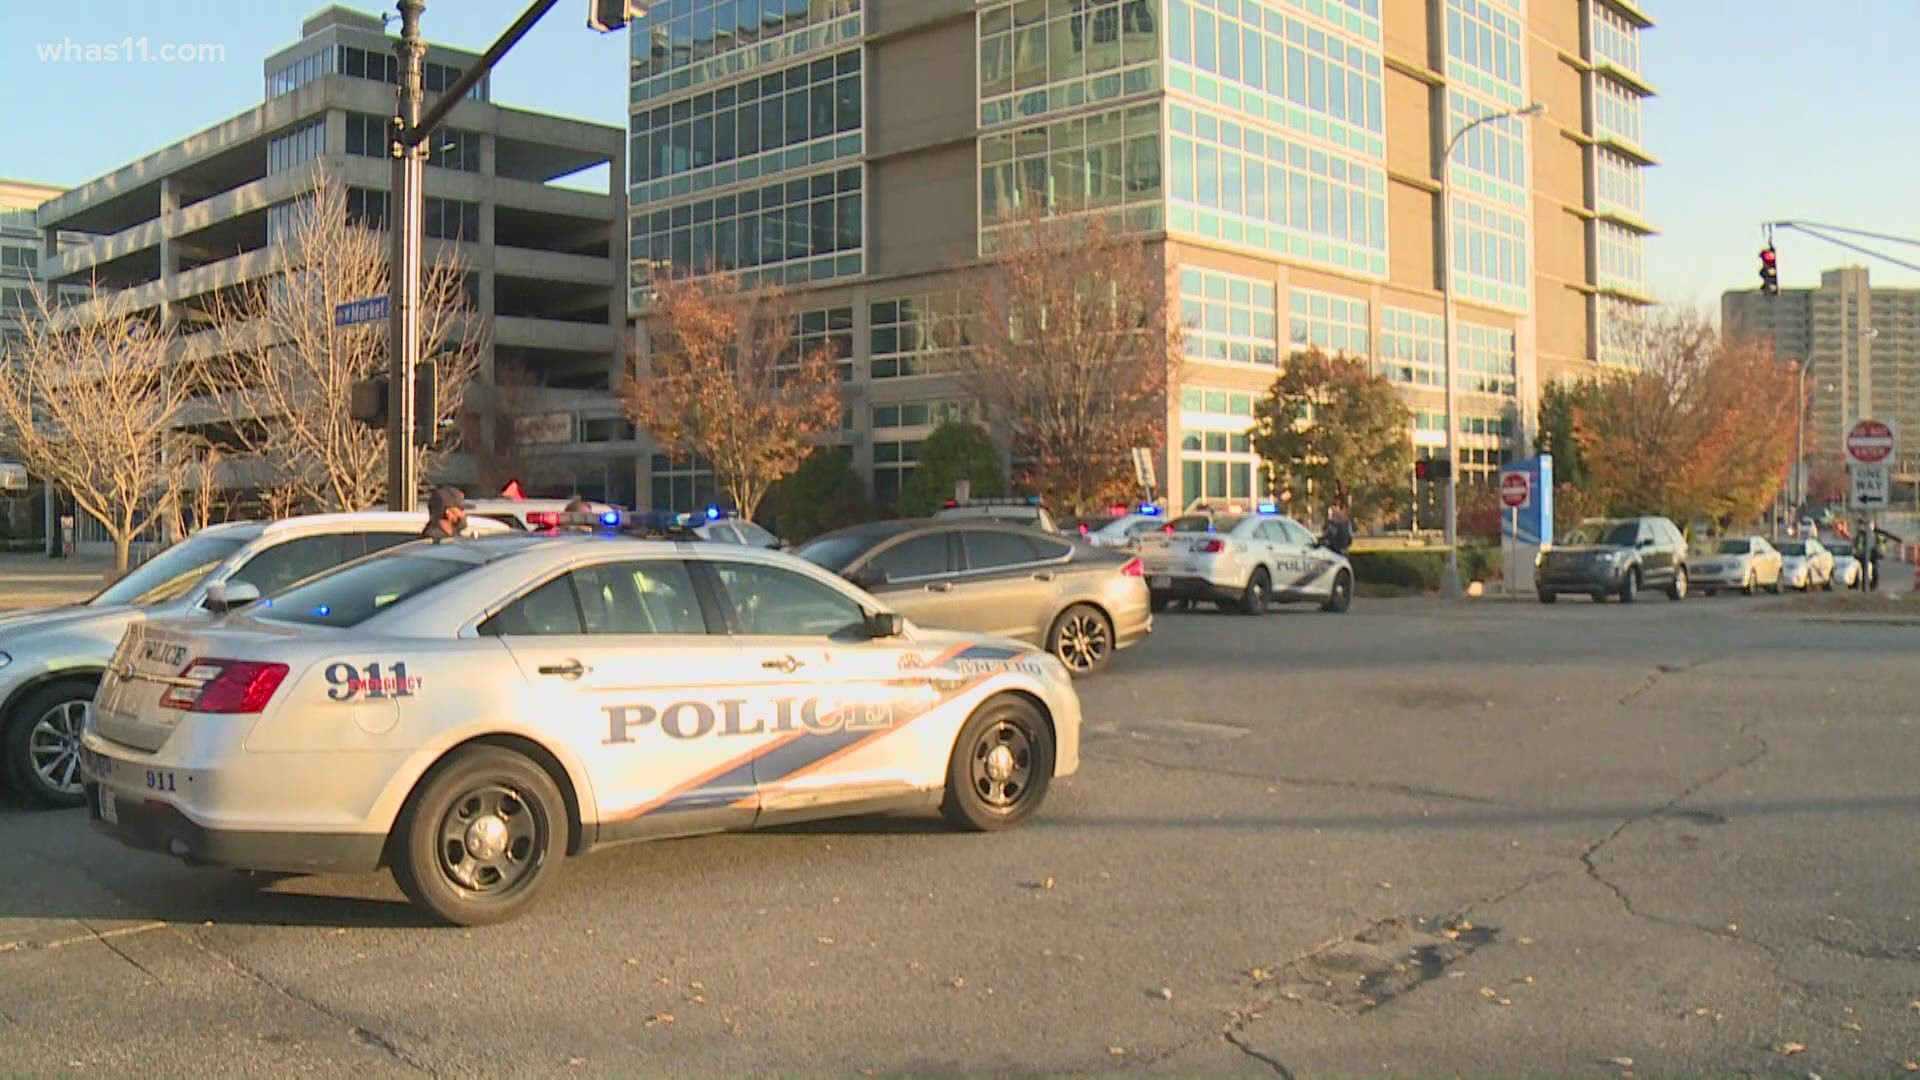 Suspect surrenders after &#39;police situation&#39; in downtown Louisville | 0